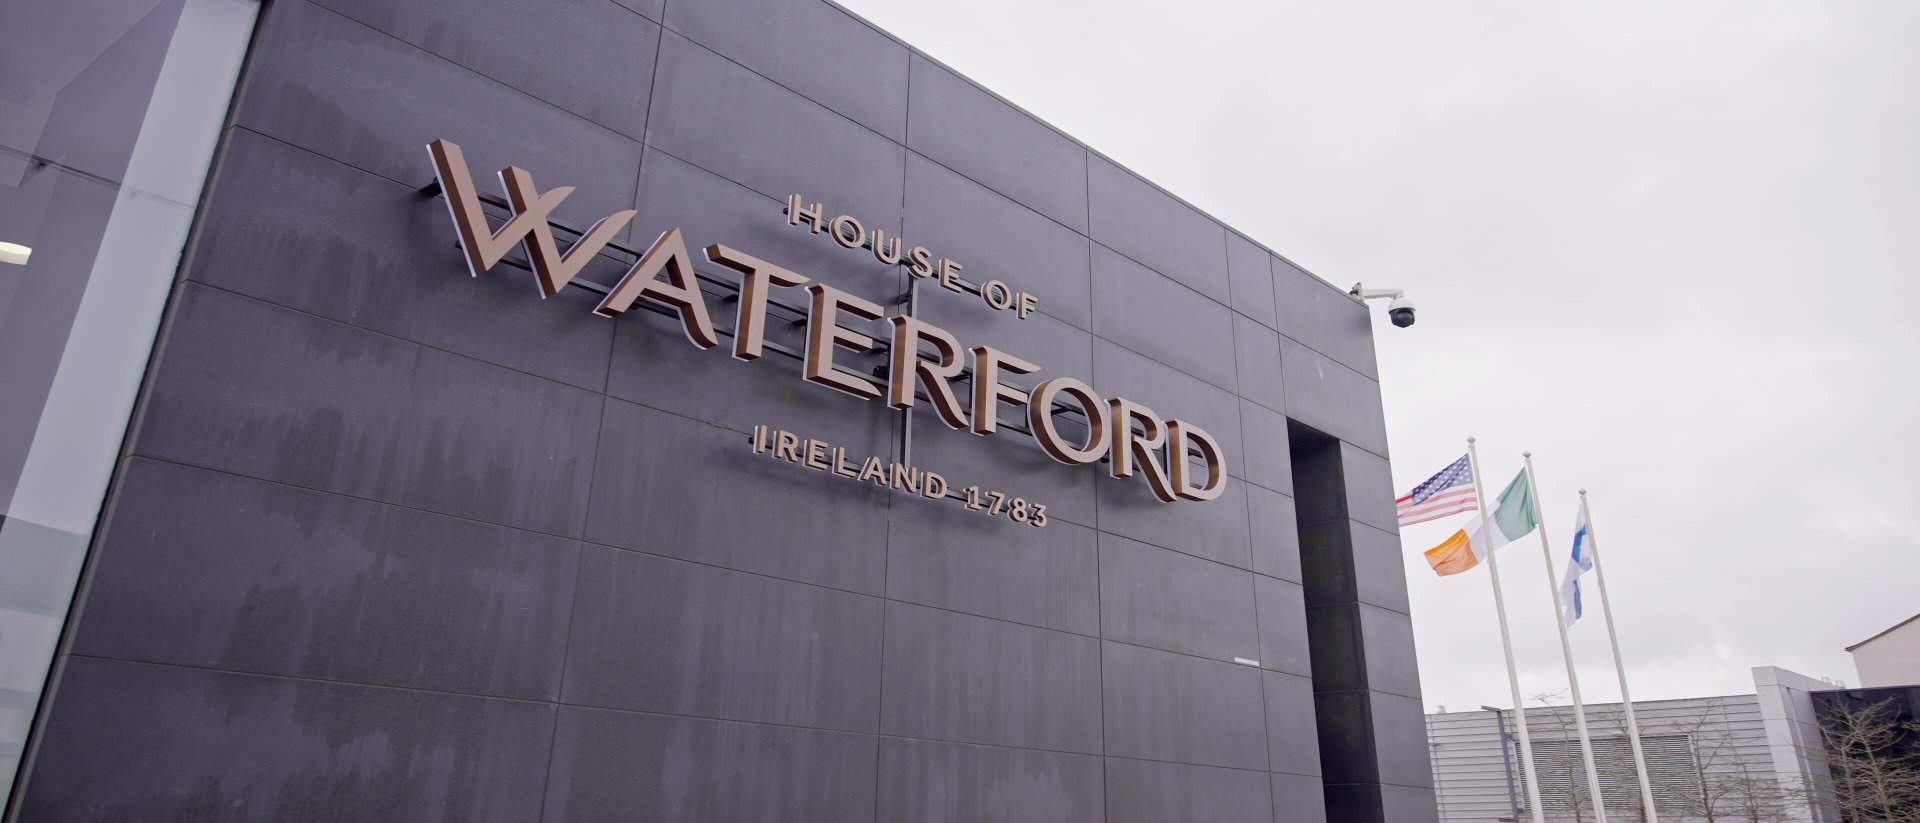 The front sign on the house of waterford building